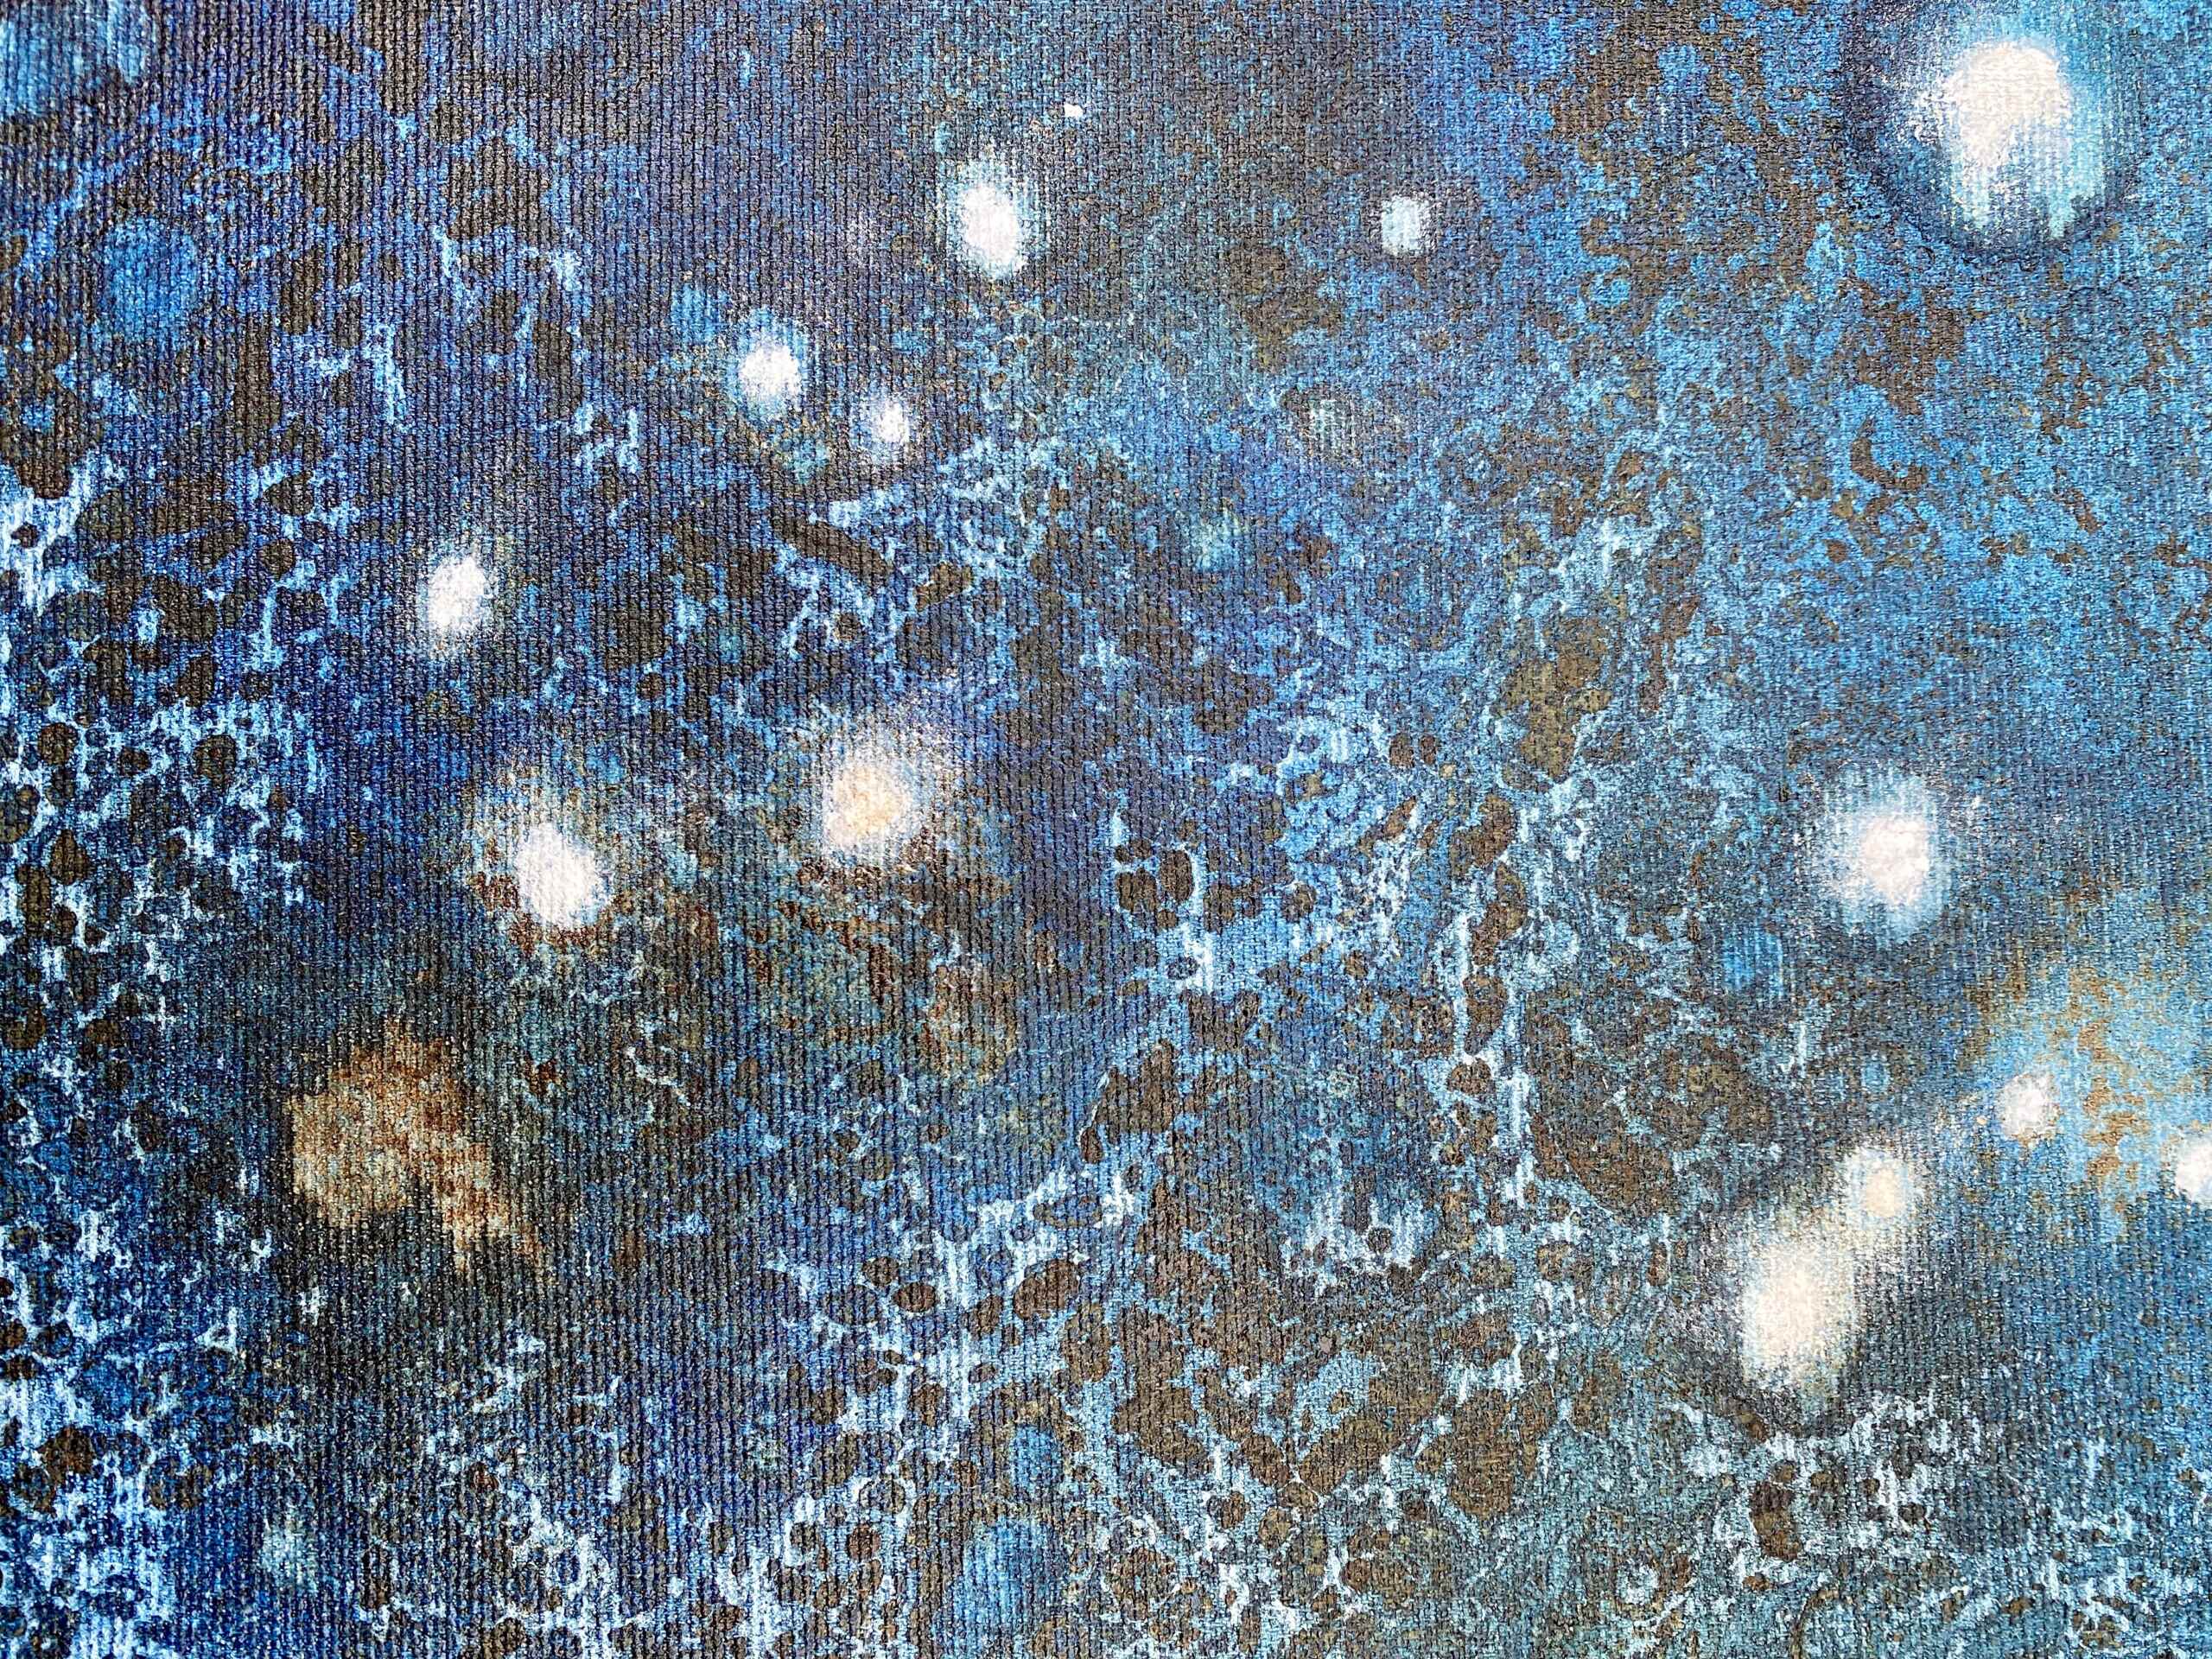 Detail of artwork "Below the Firmament" by Nina Groth